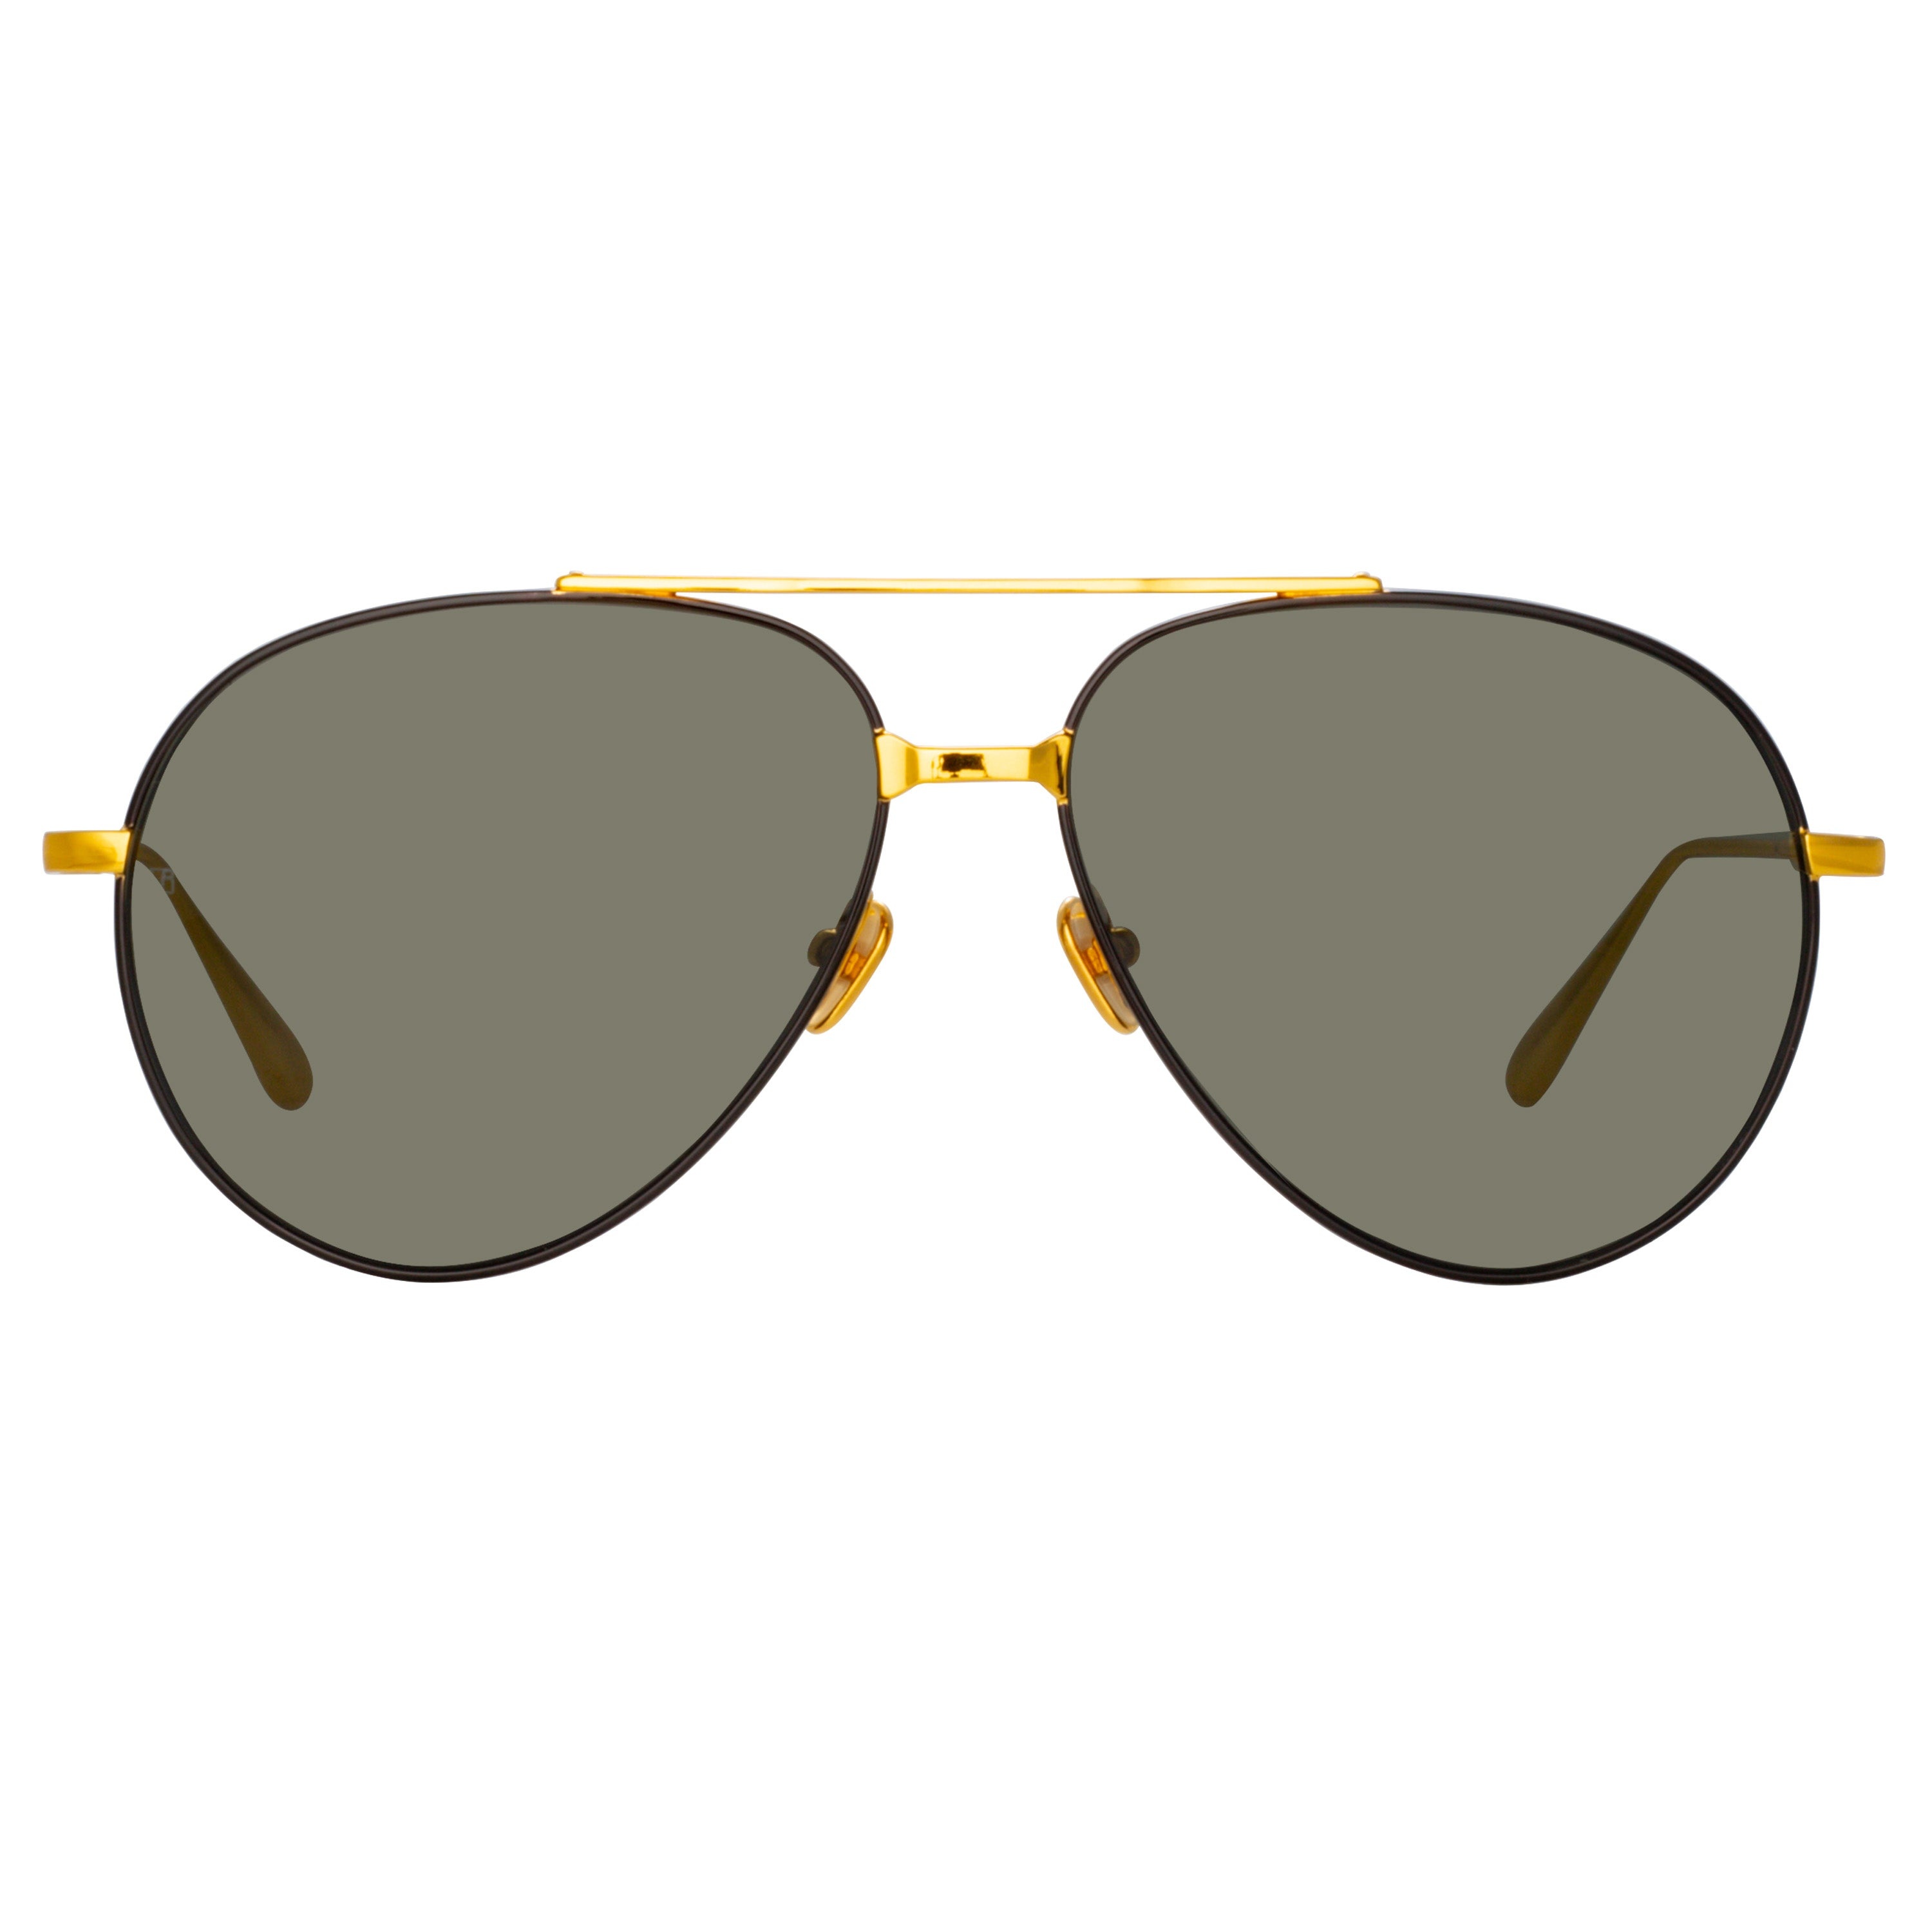 MARCELO AVIATOR SUNGLASSES IN BLACK AND YELLOW GOLD - 1